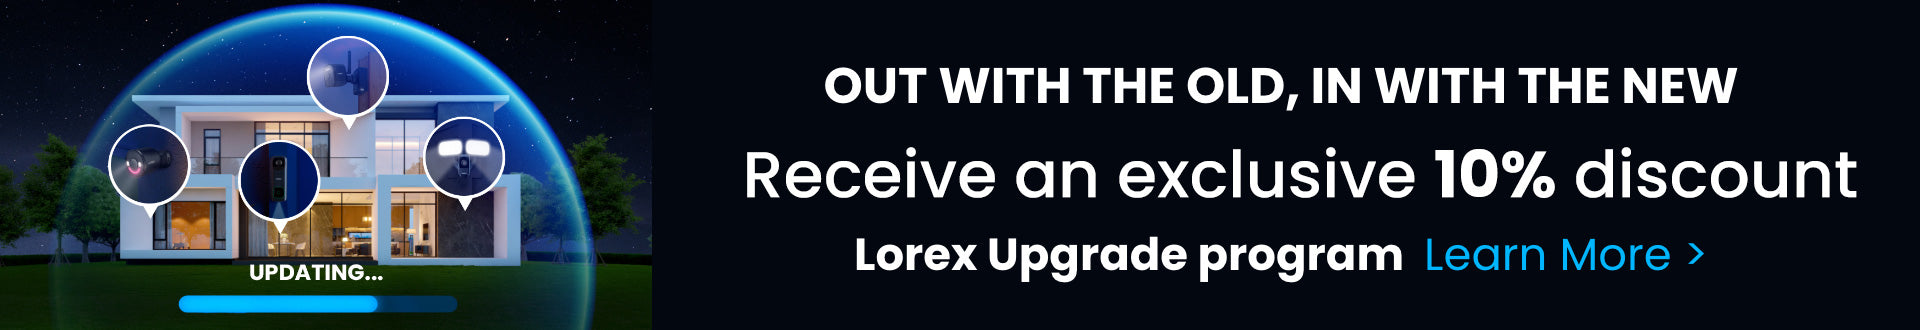 Receive an exclusive 10% discount with Lorex Upgrade Program. Click here to learn more.